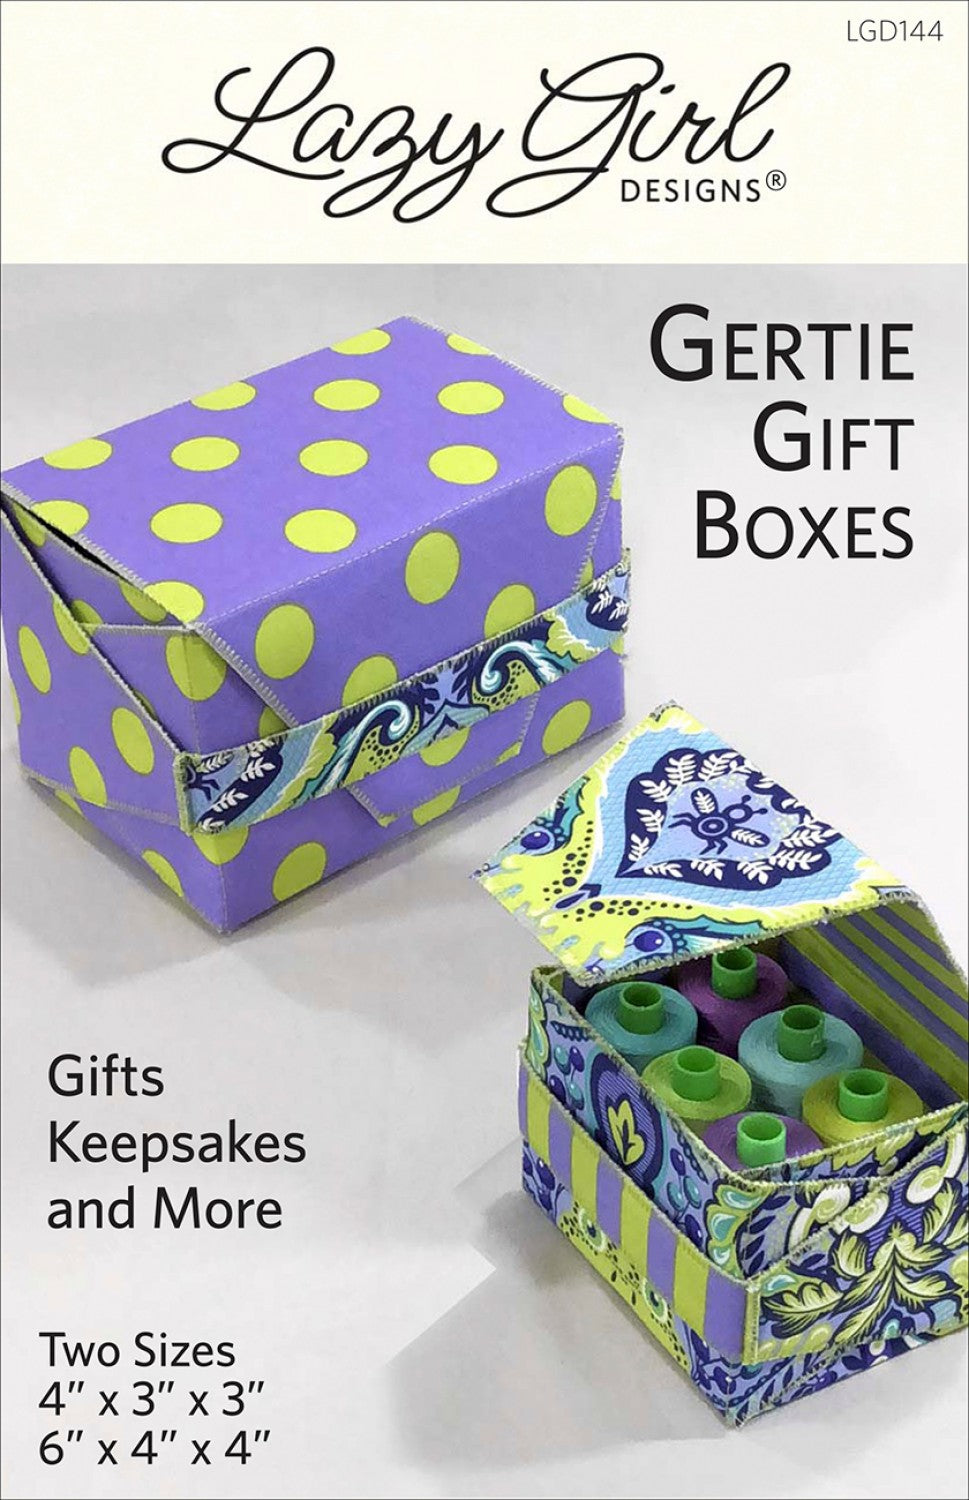 Gertie Gift Boxes,  by Joan Hawley for Lazy Girl Designs